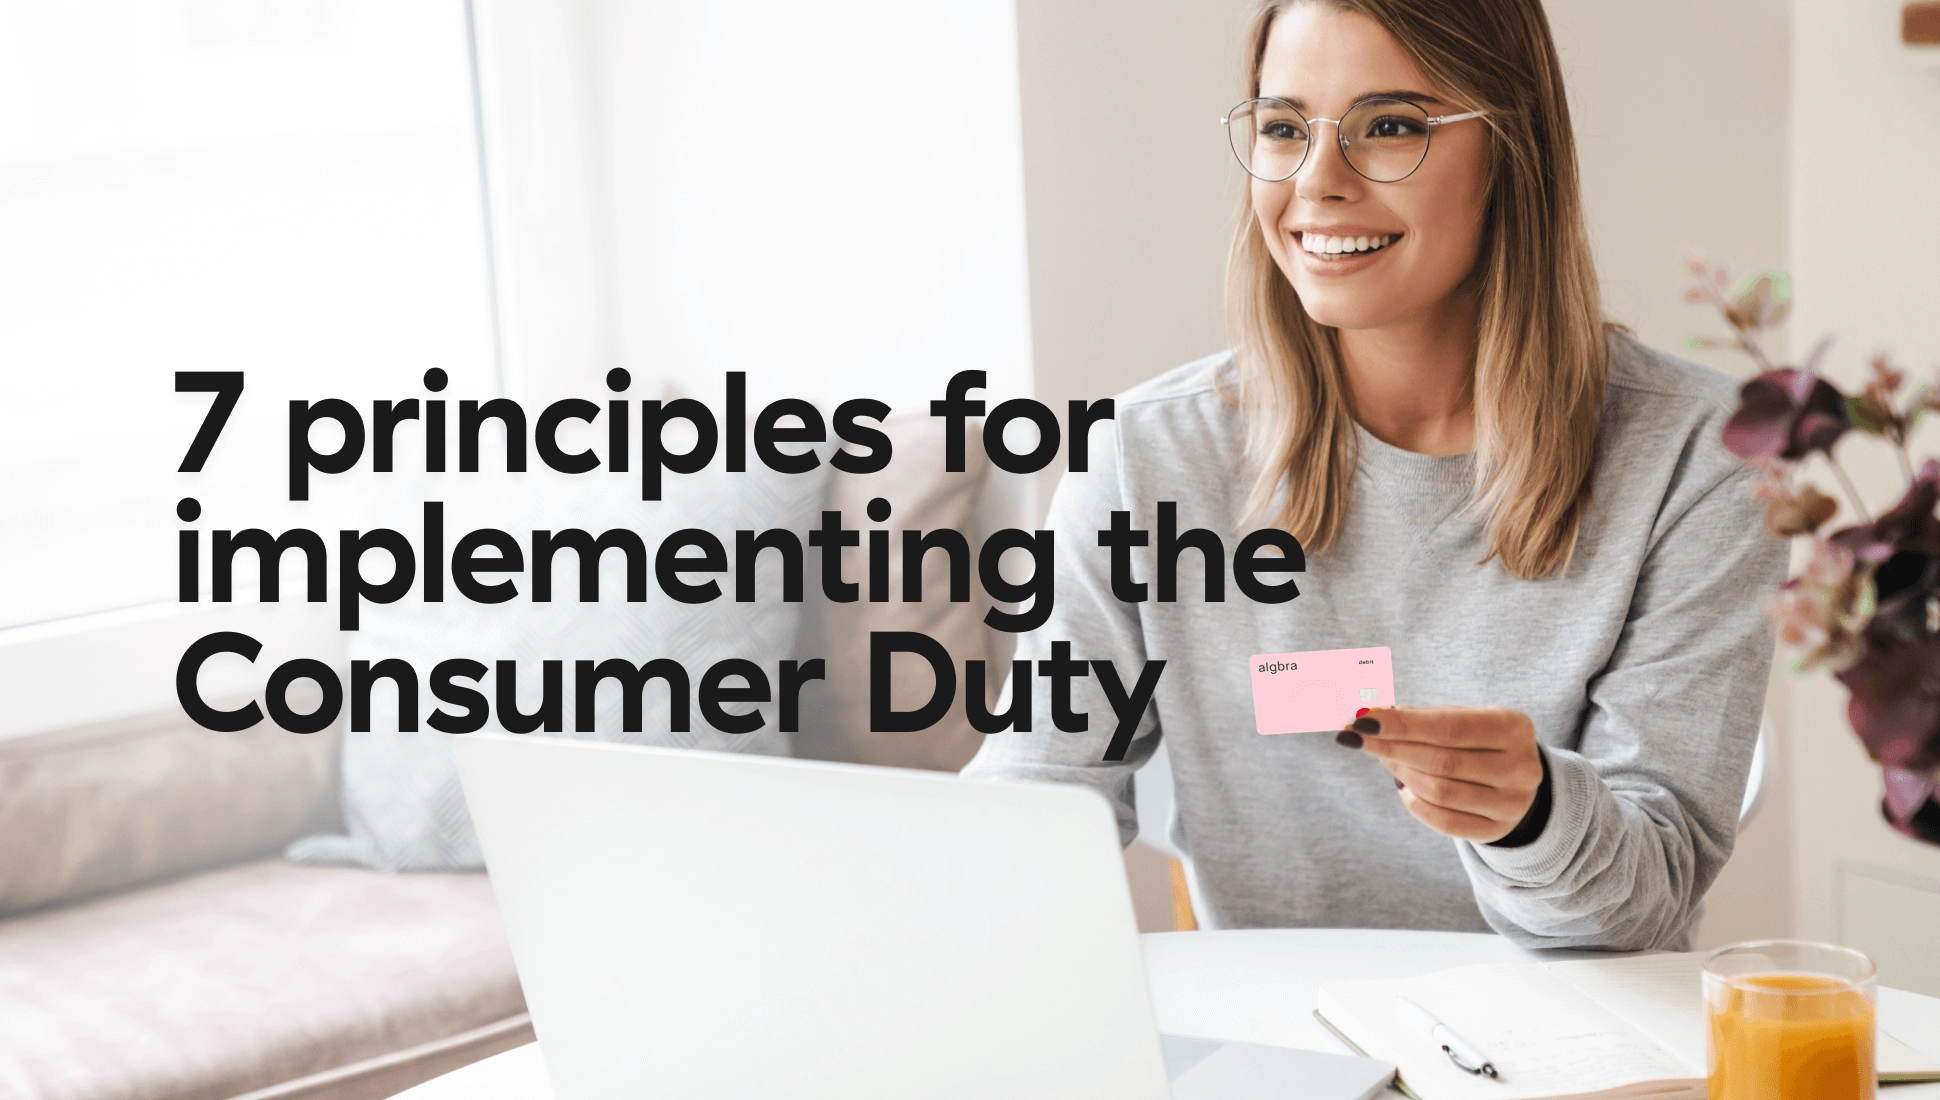 7 principles for implementing the Consumer Duty